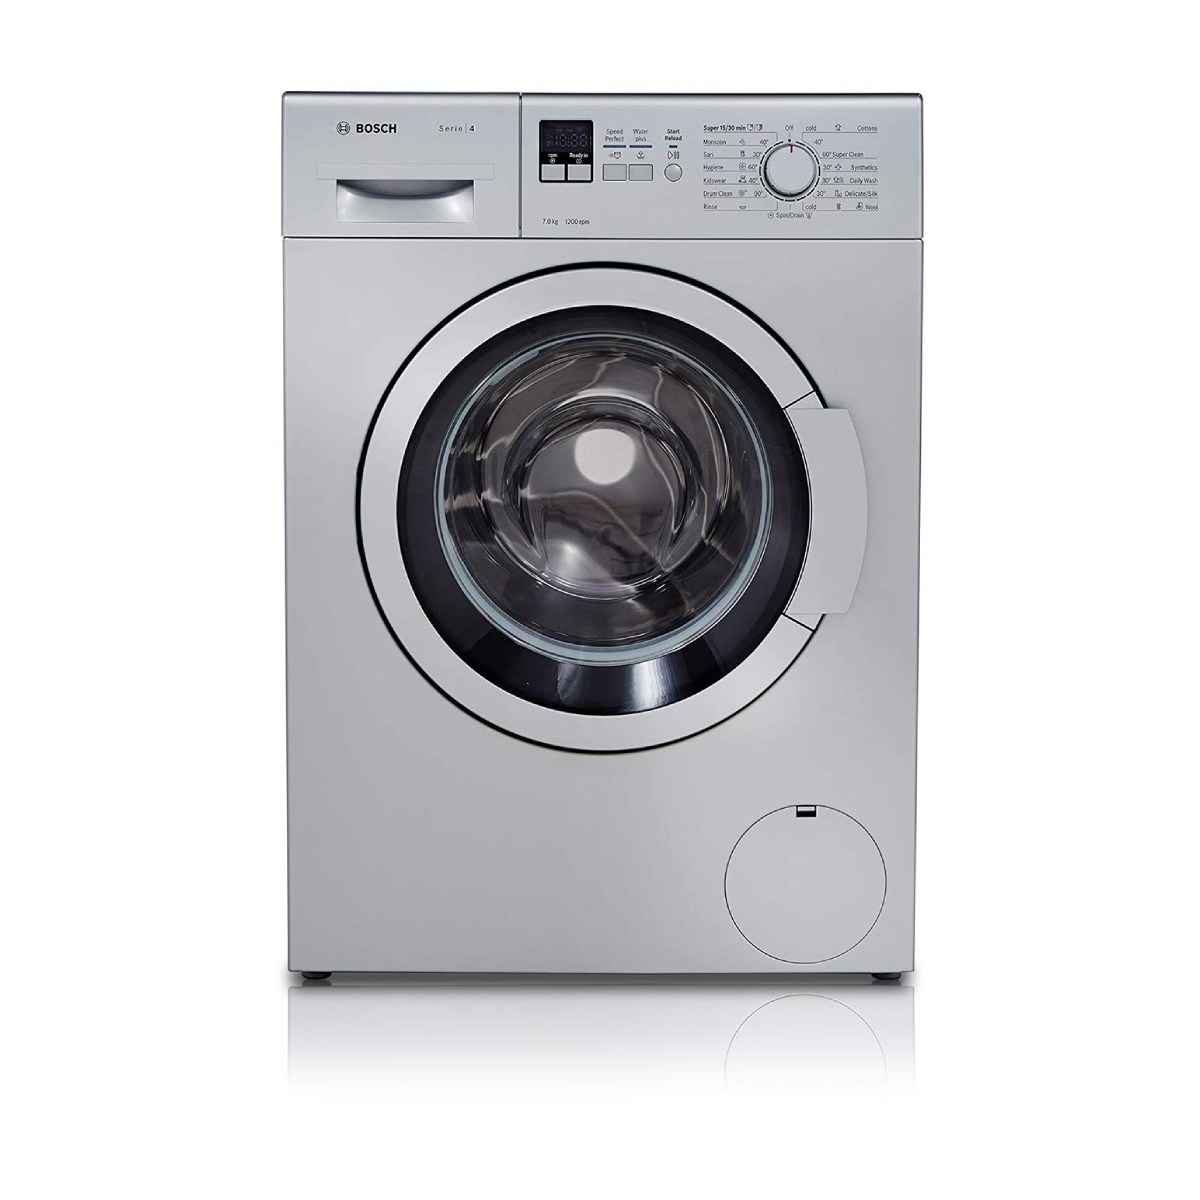 Bosch 7  Fully Automatic Front Load Washing Machine Silver (WAK24168IN)